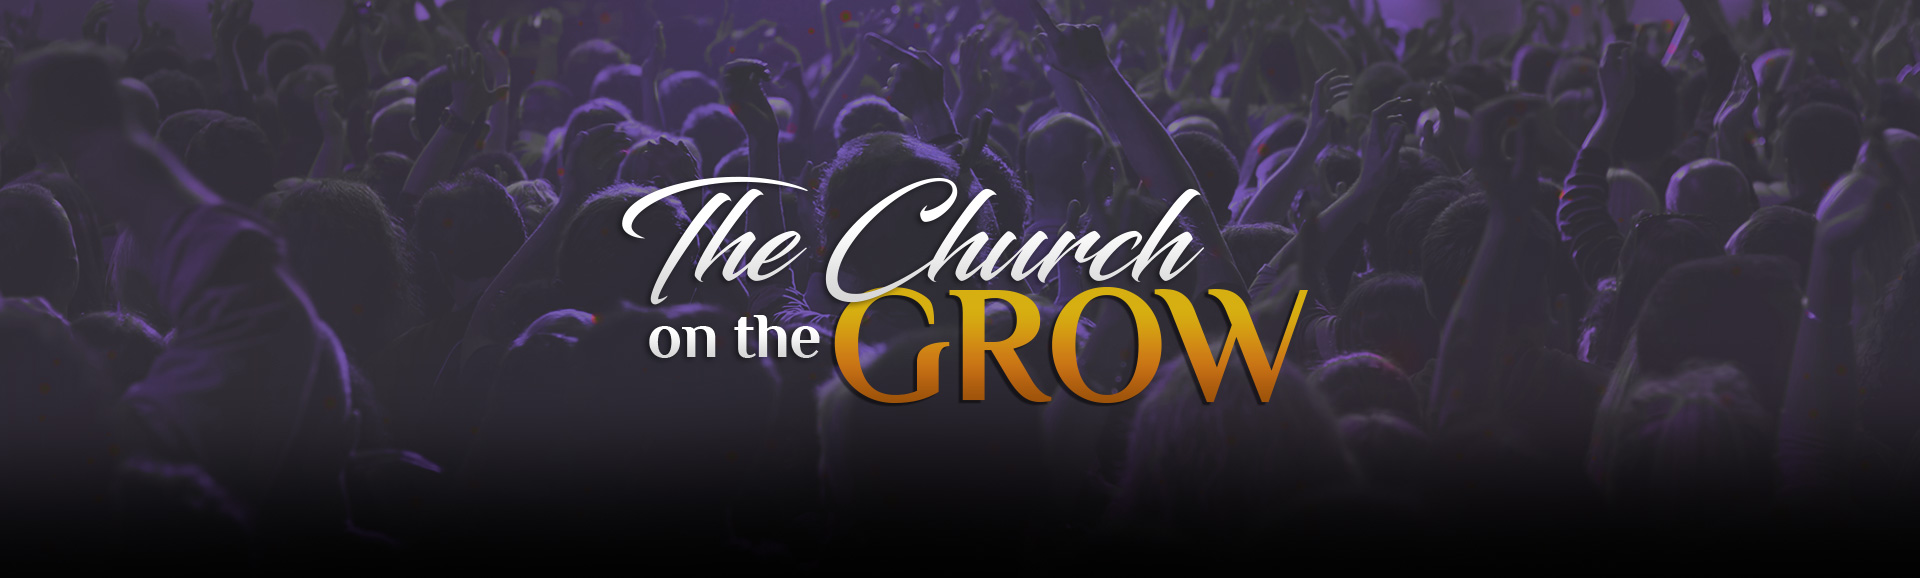 The Church on the Grow Our Ministries